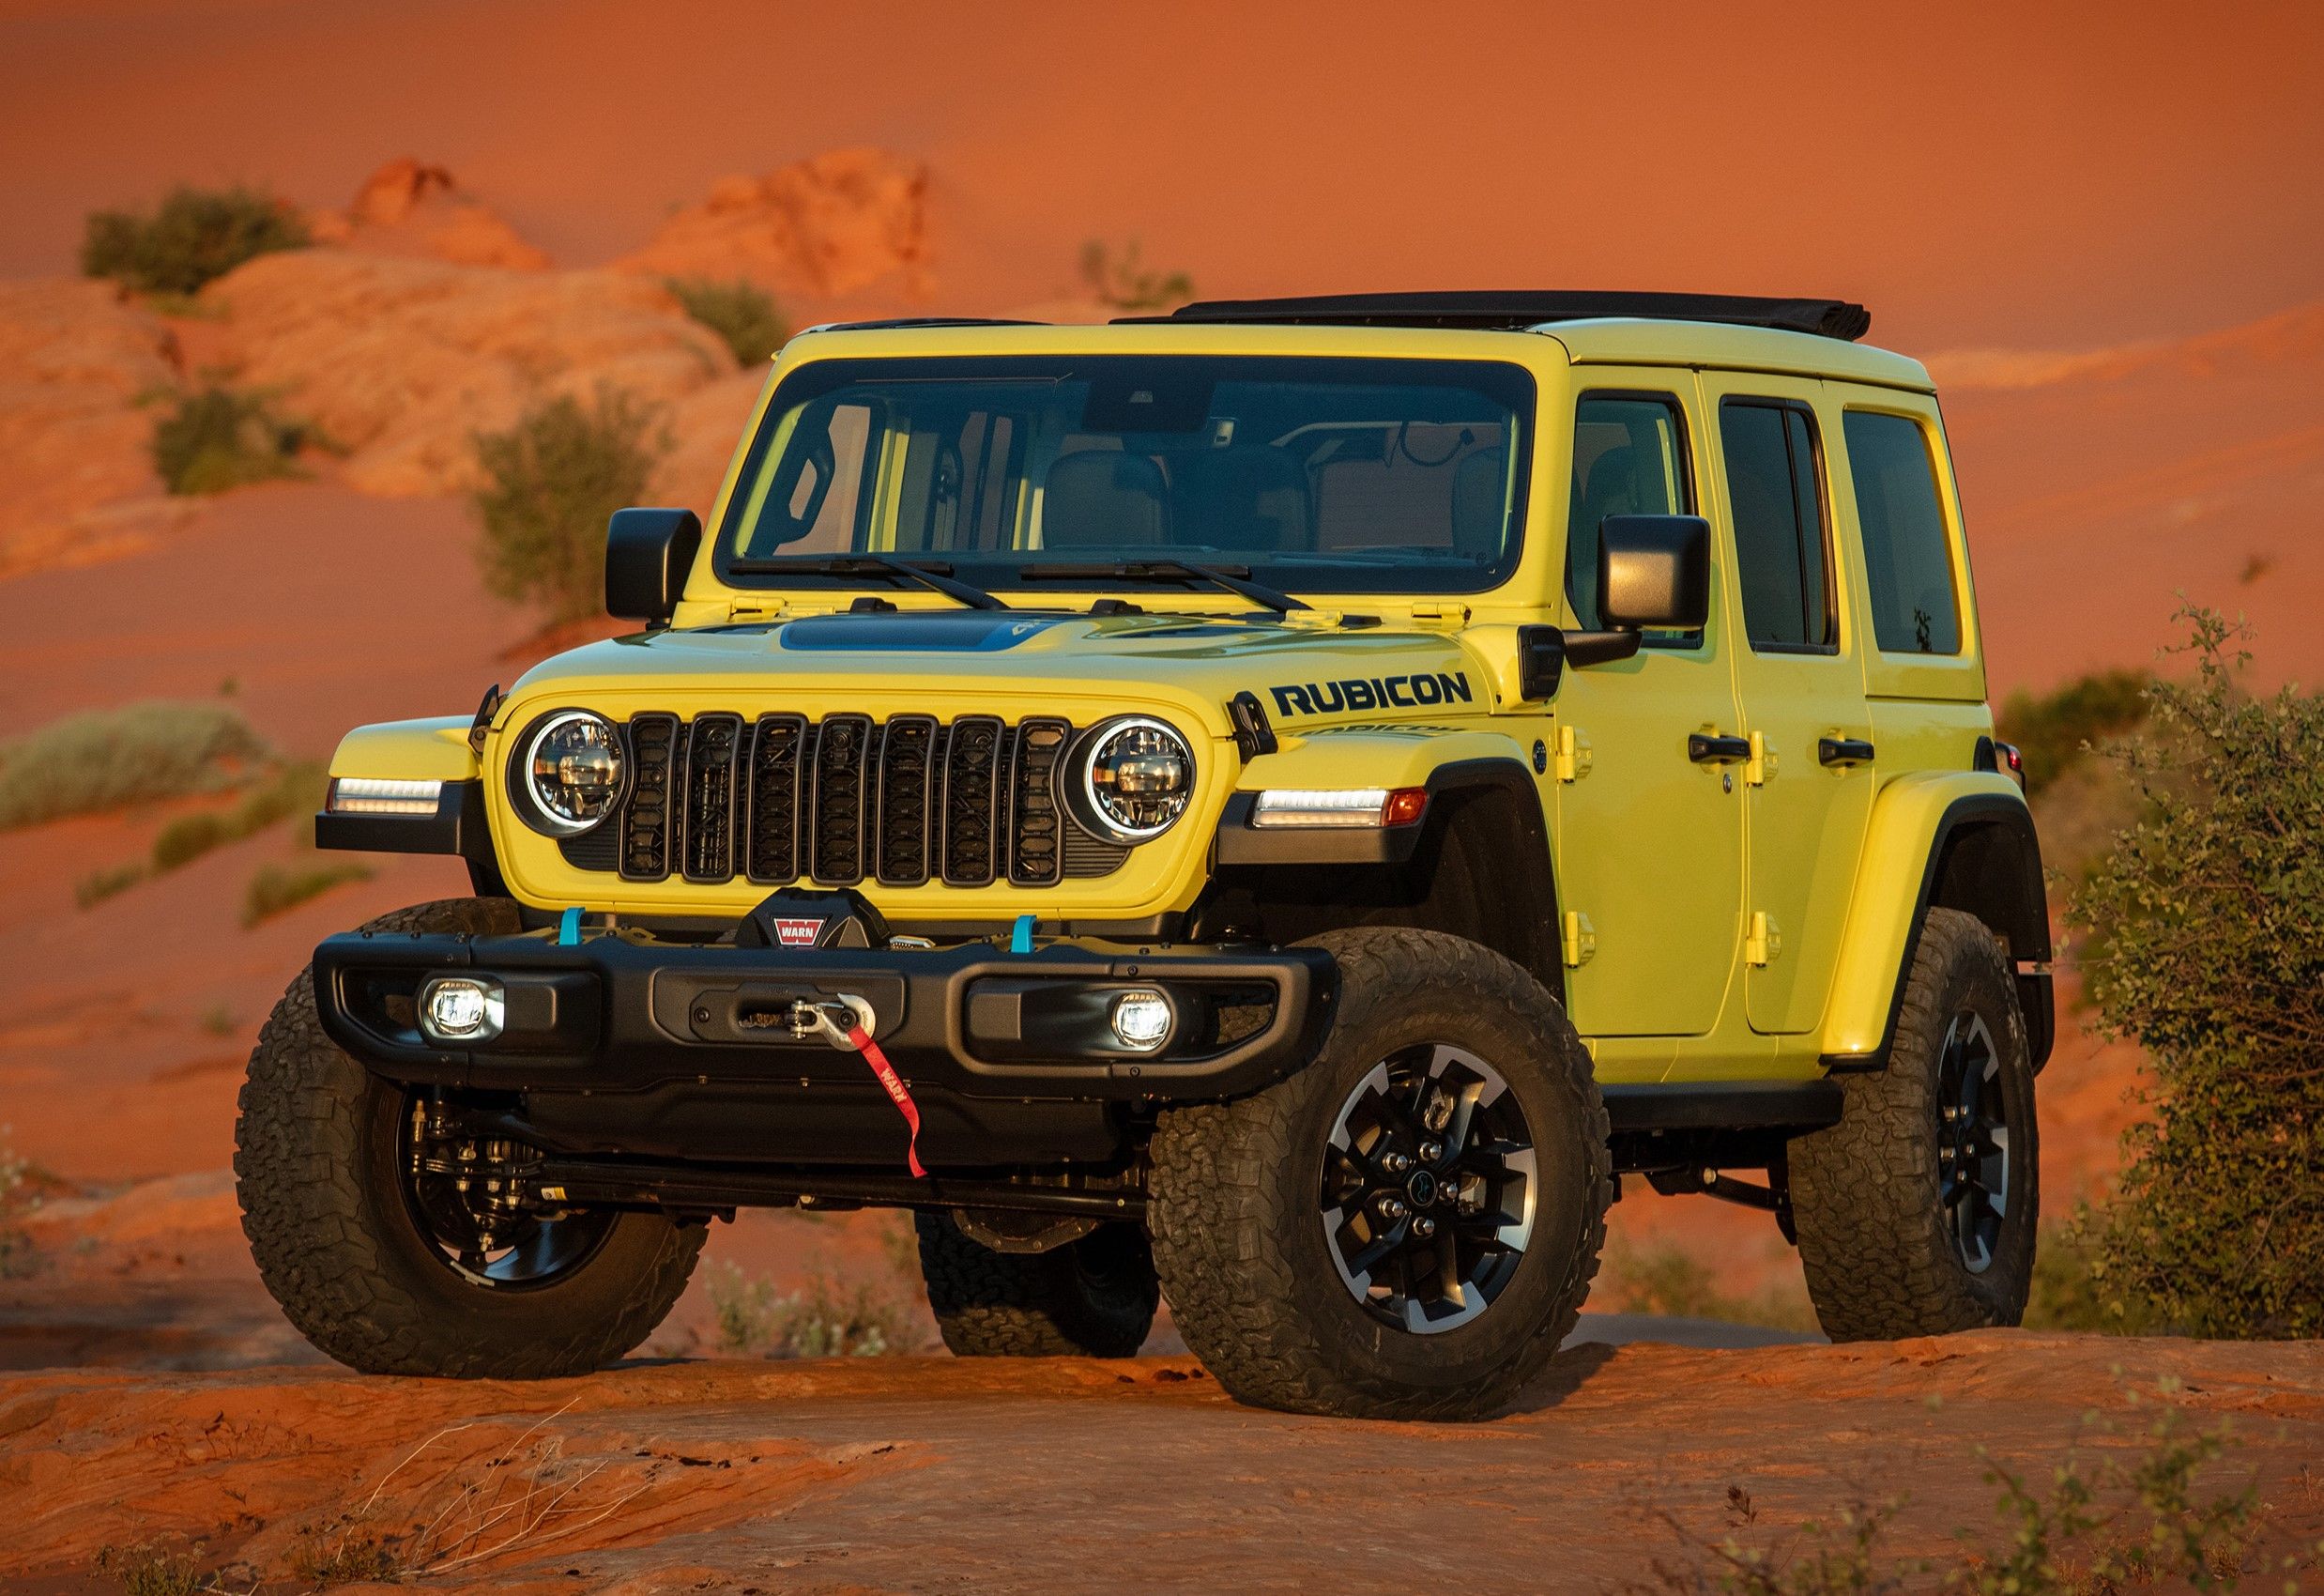 Jeep Wrangler Upgrades: Top 12 Mods For Beginners